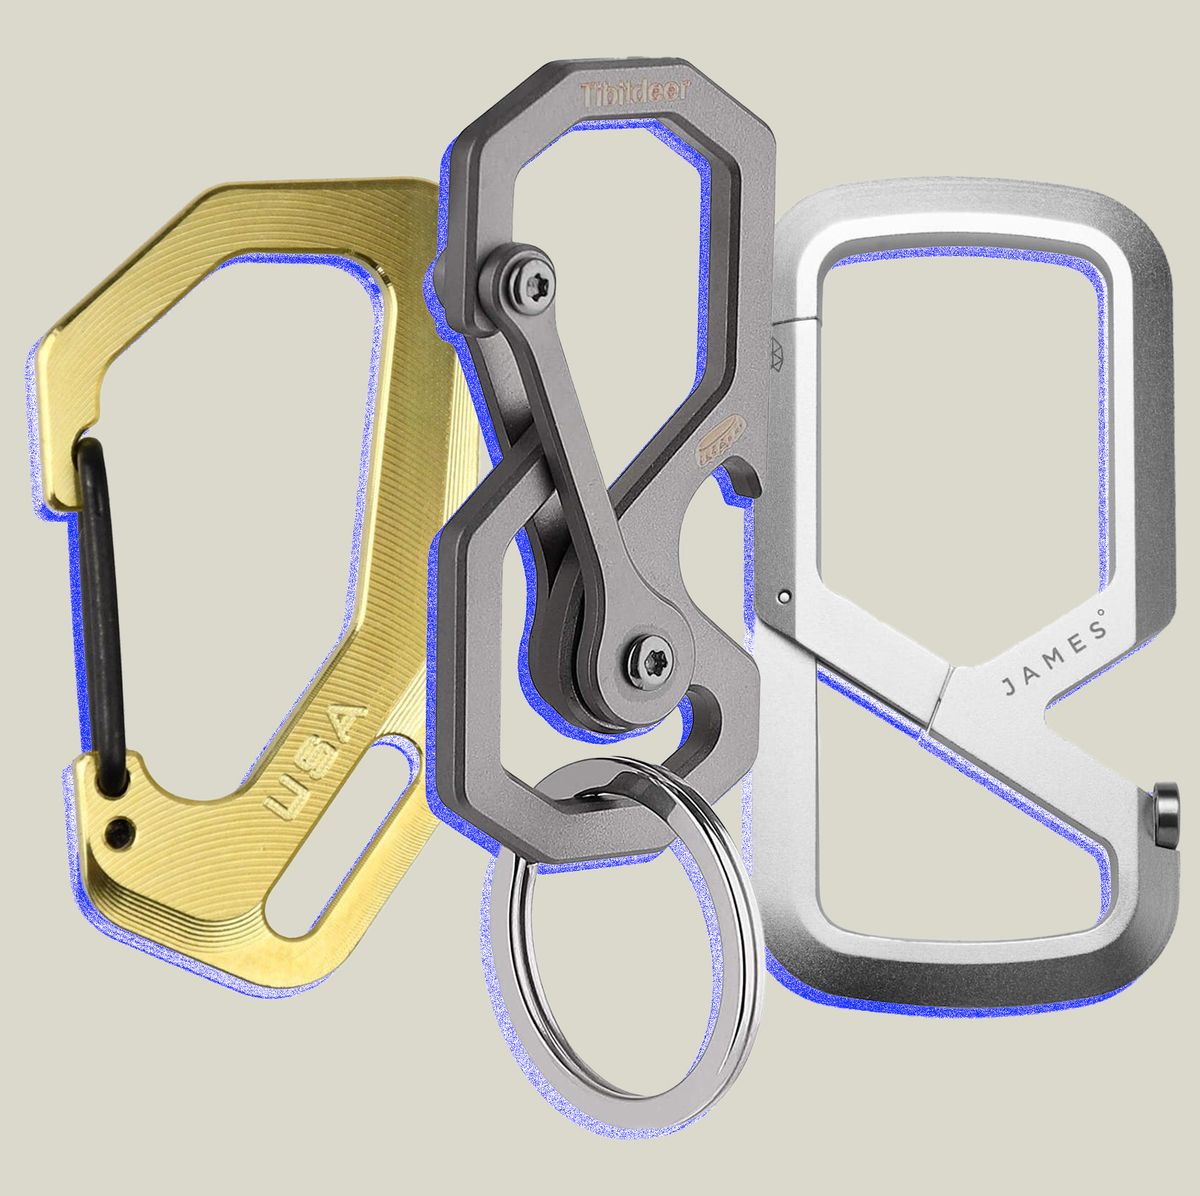 The Guide TOP / Titanium Edc Keychain Bi-carabiner, With Swivel Takes  Turns. 